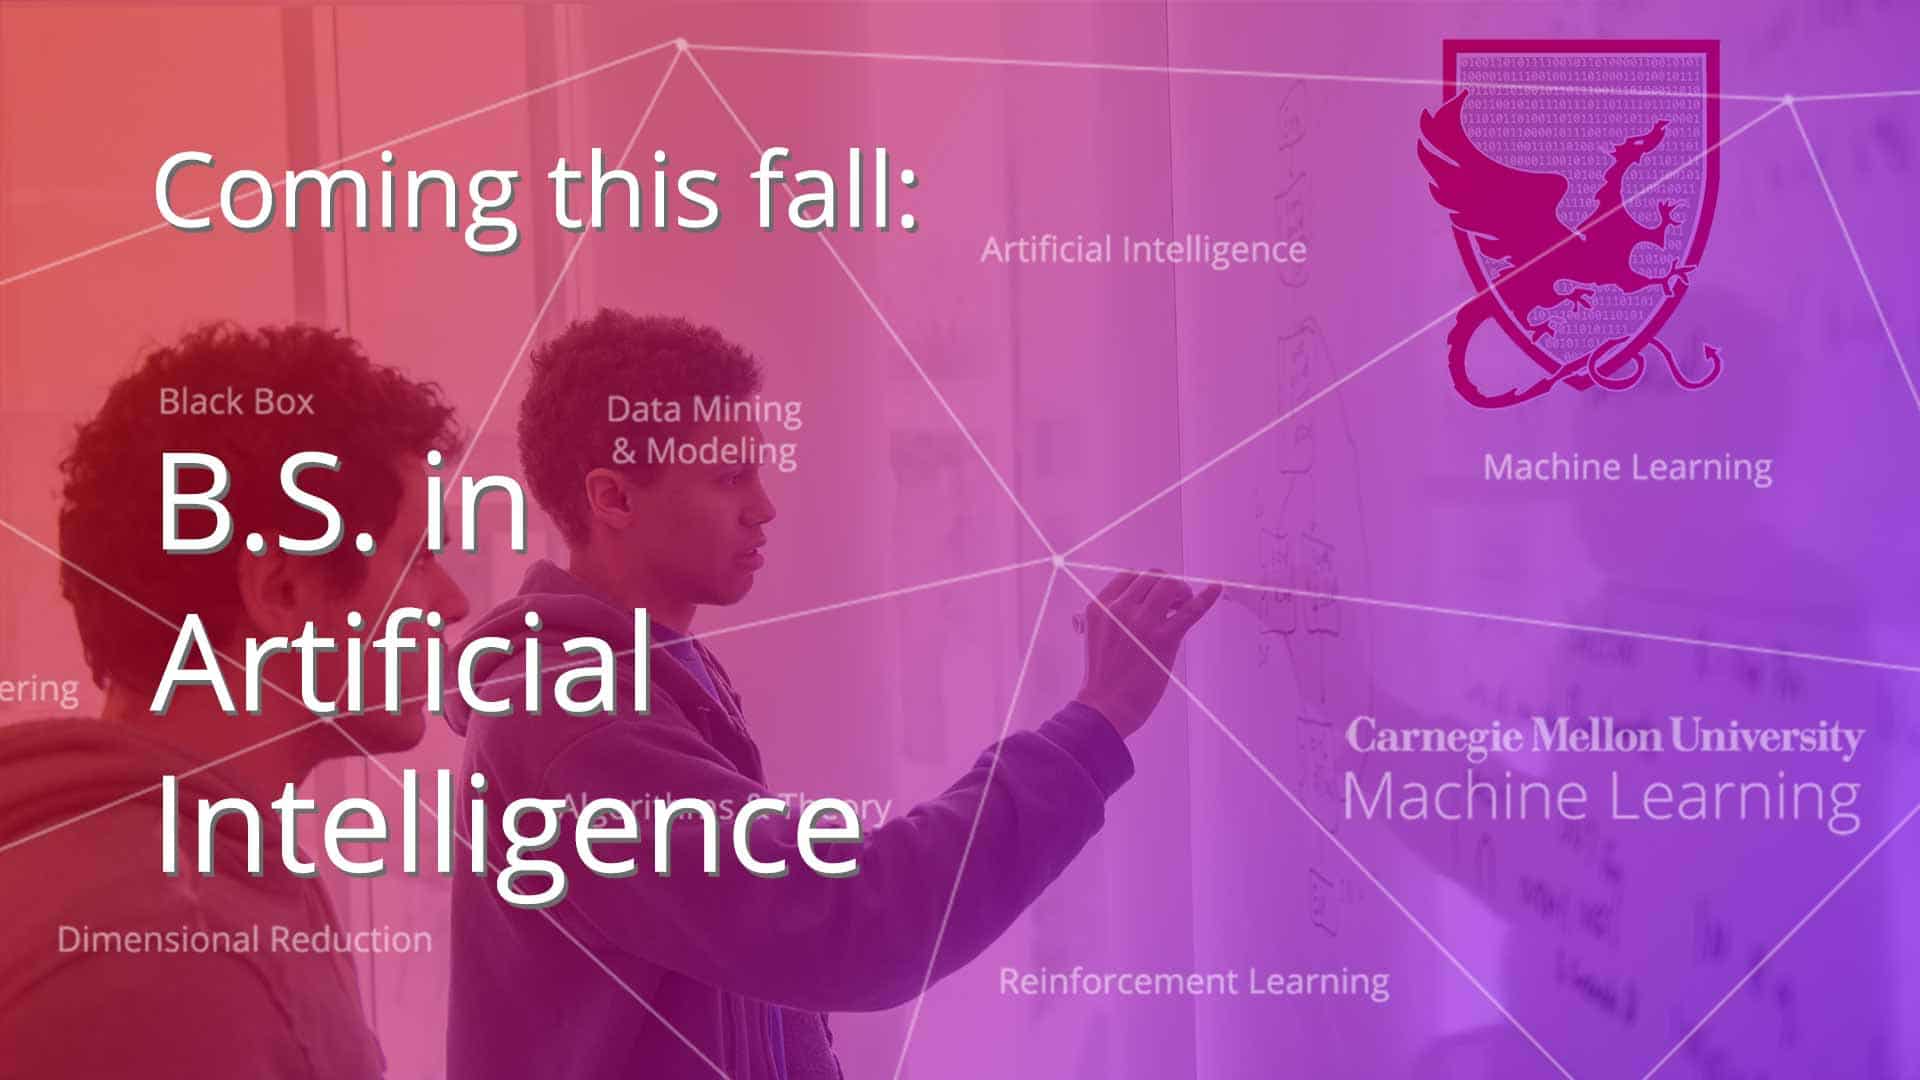 Carnegie Mellon University Launches Bachelors of Artificial Intelligence Program - Machine Learning Department